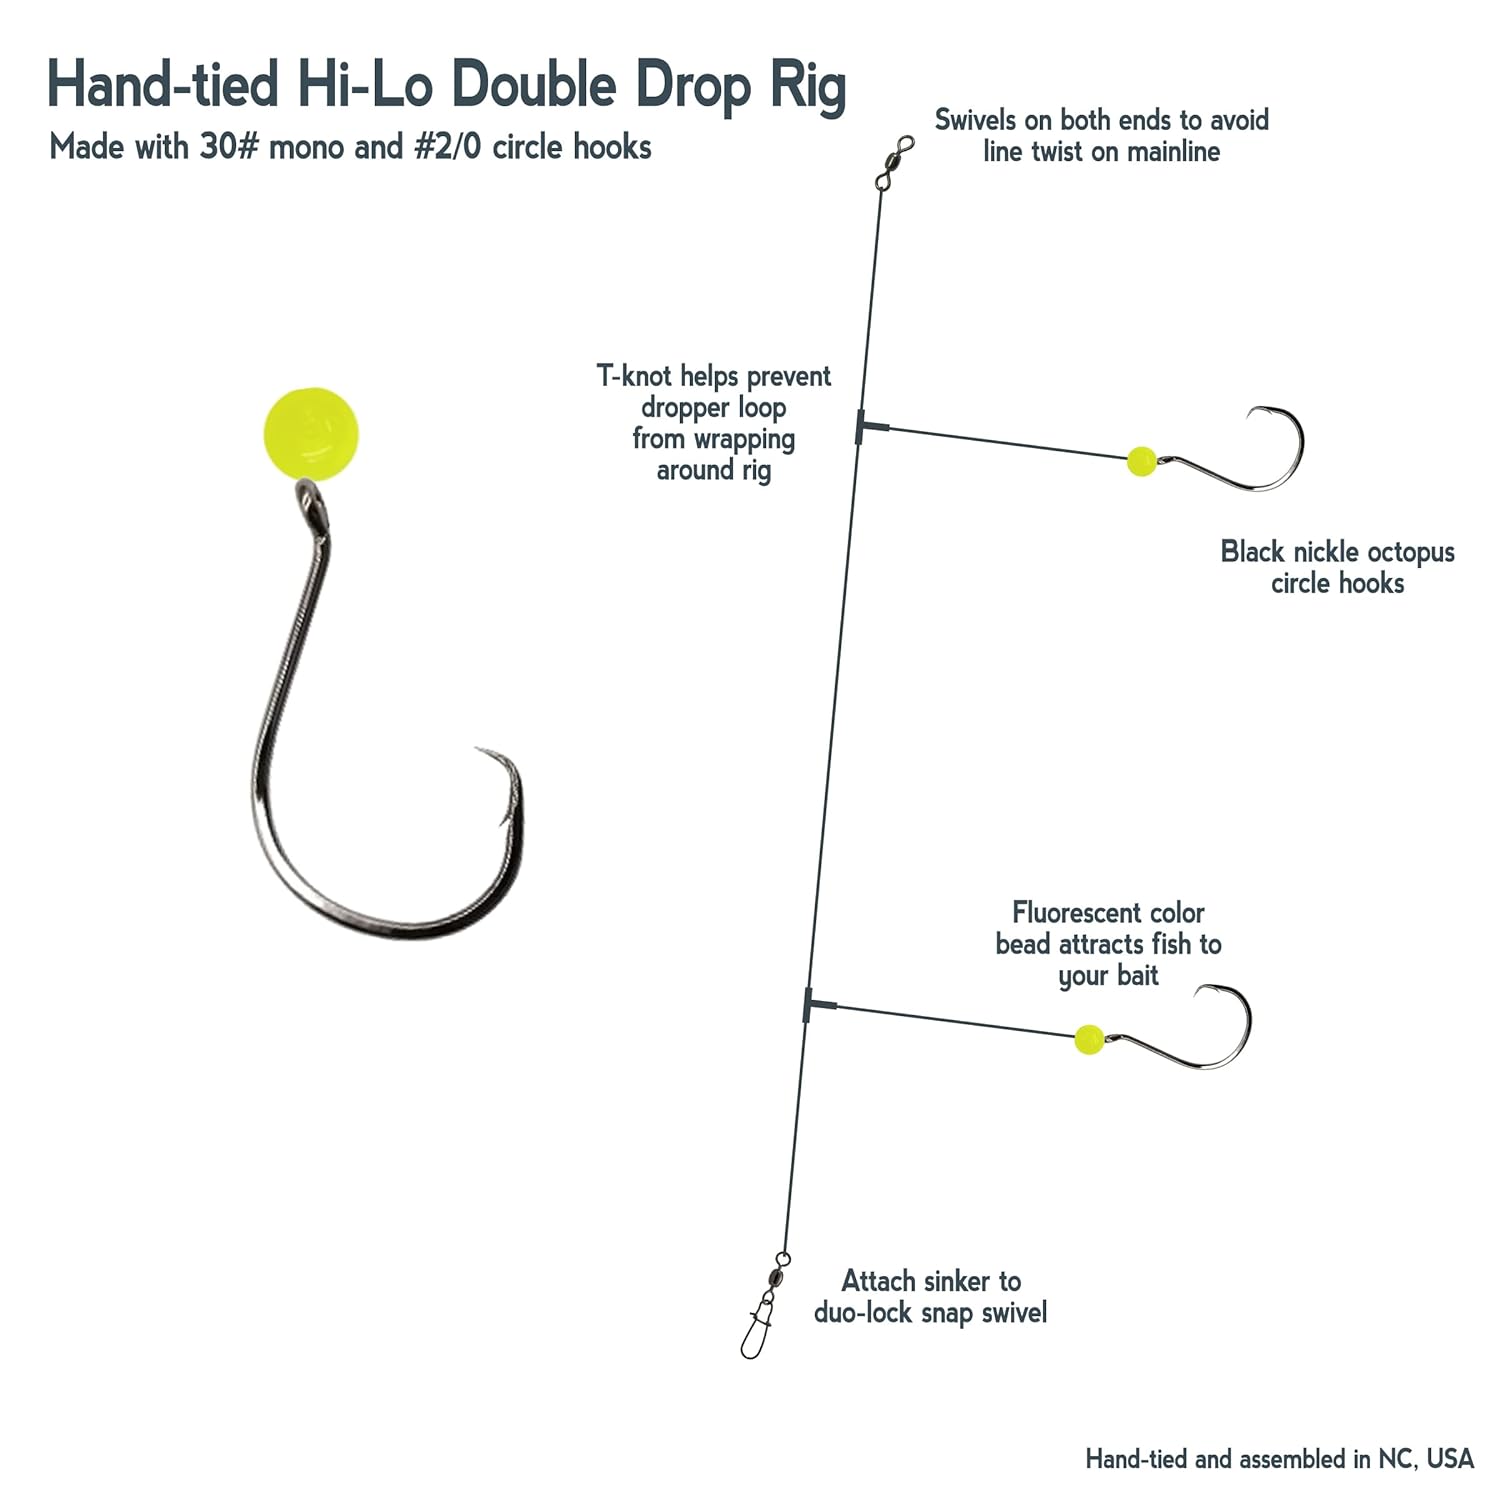 3 Pack '2/0' Bead Rig Surf Fishing Hi-Lo Double Drop Hand-Tied 30LB Mono (Chartreuse)